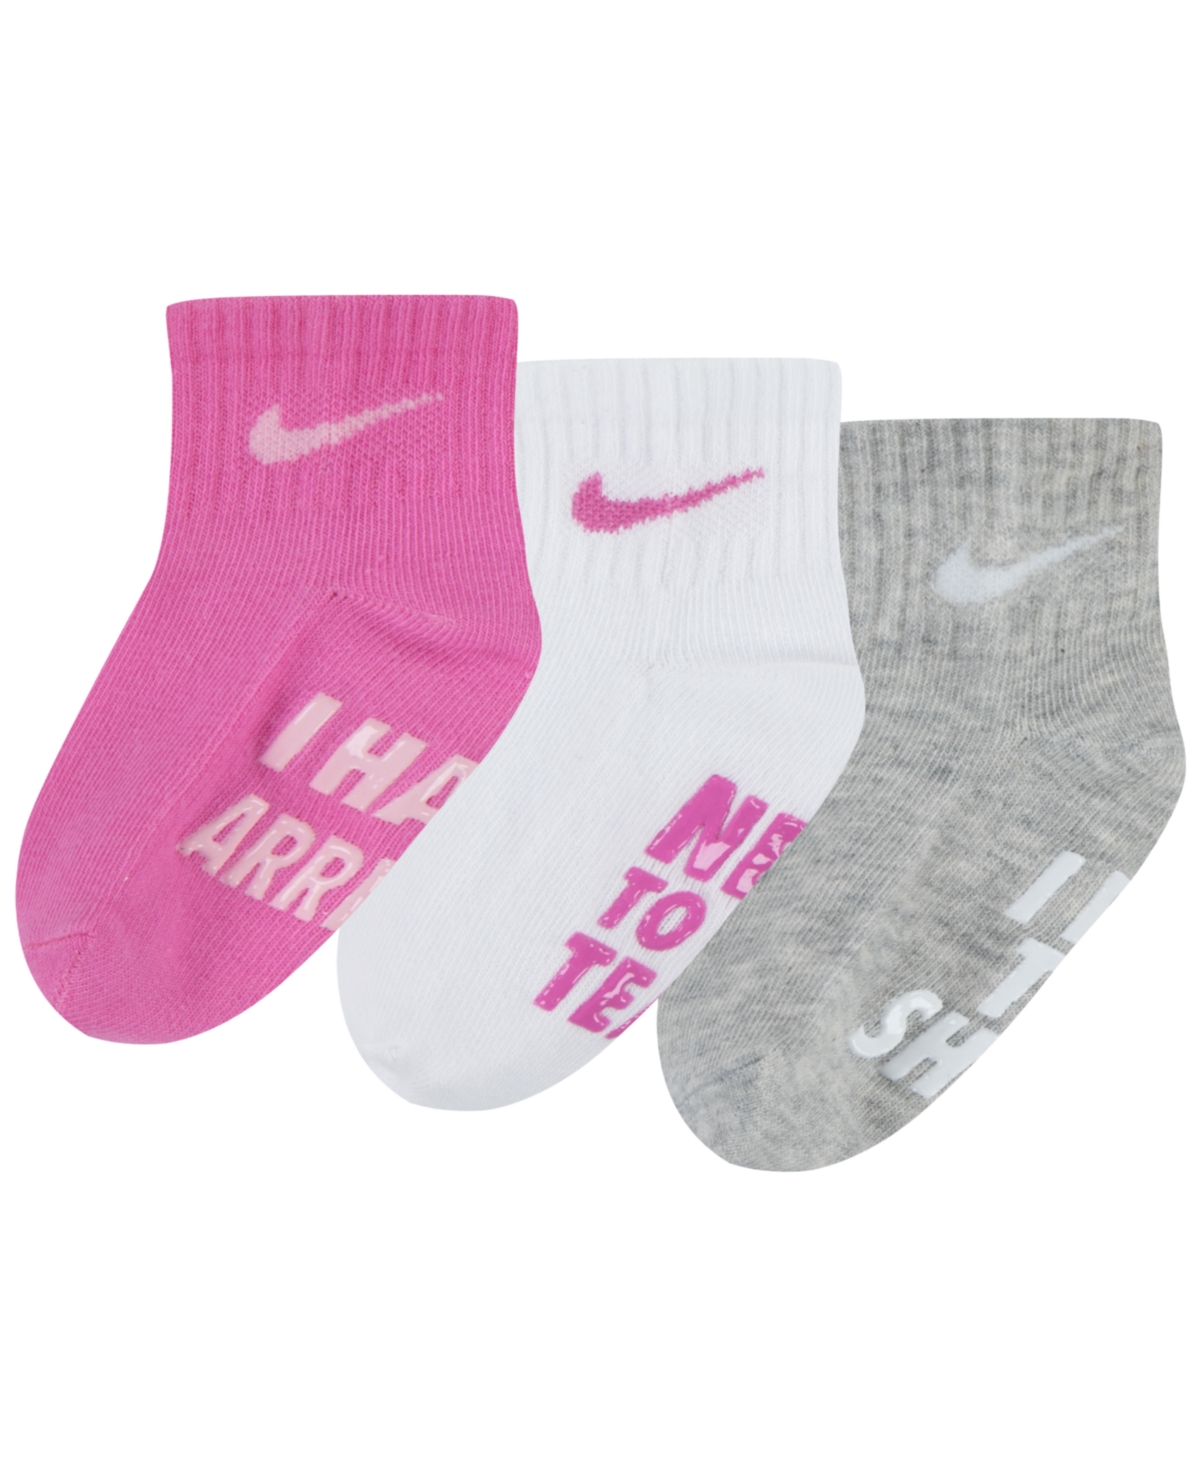 Nike Baby Boys Or Girls Verbiage Gripper Cotton Socks, Pack Of 3 In Playful Pink